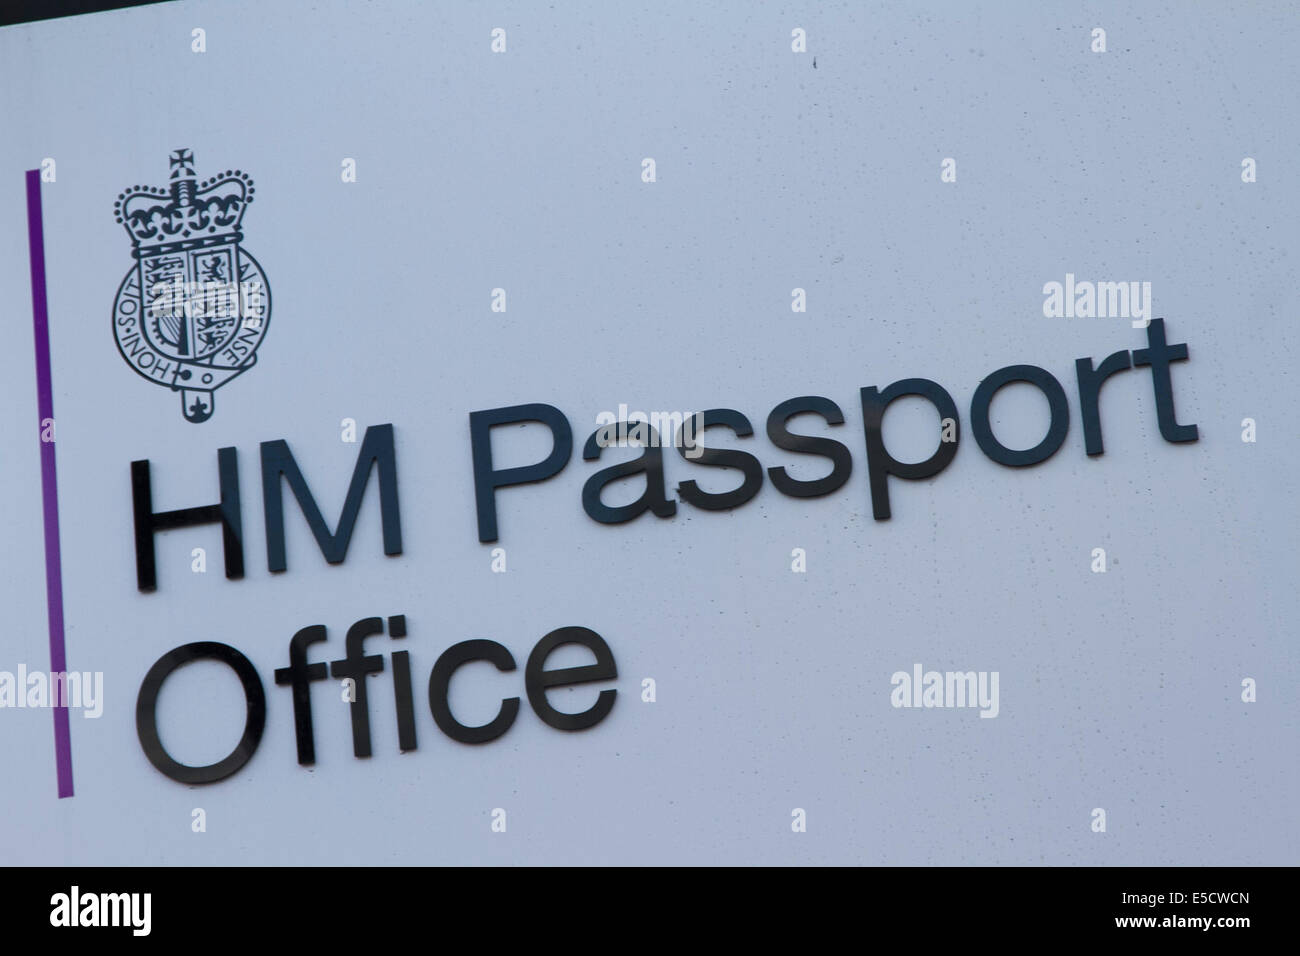 London, UK. 28th July 2014. Staff staged a one day walk out at the passport office over pay cuts, shortages and pensions Credit:  amer ghazzal/Alamy Live News Stock Photo